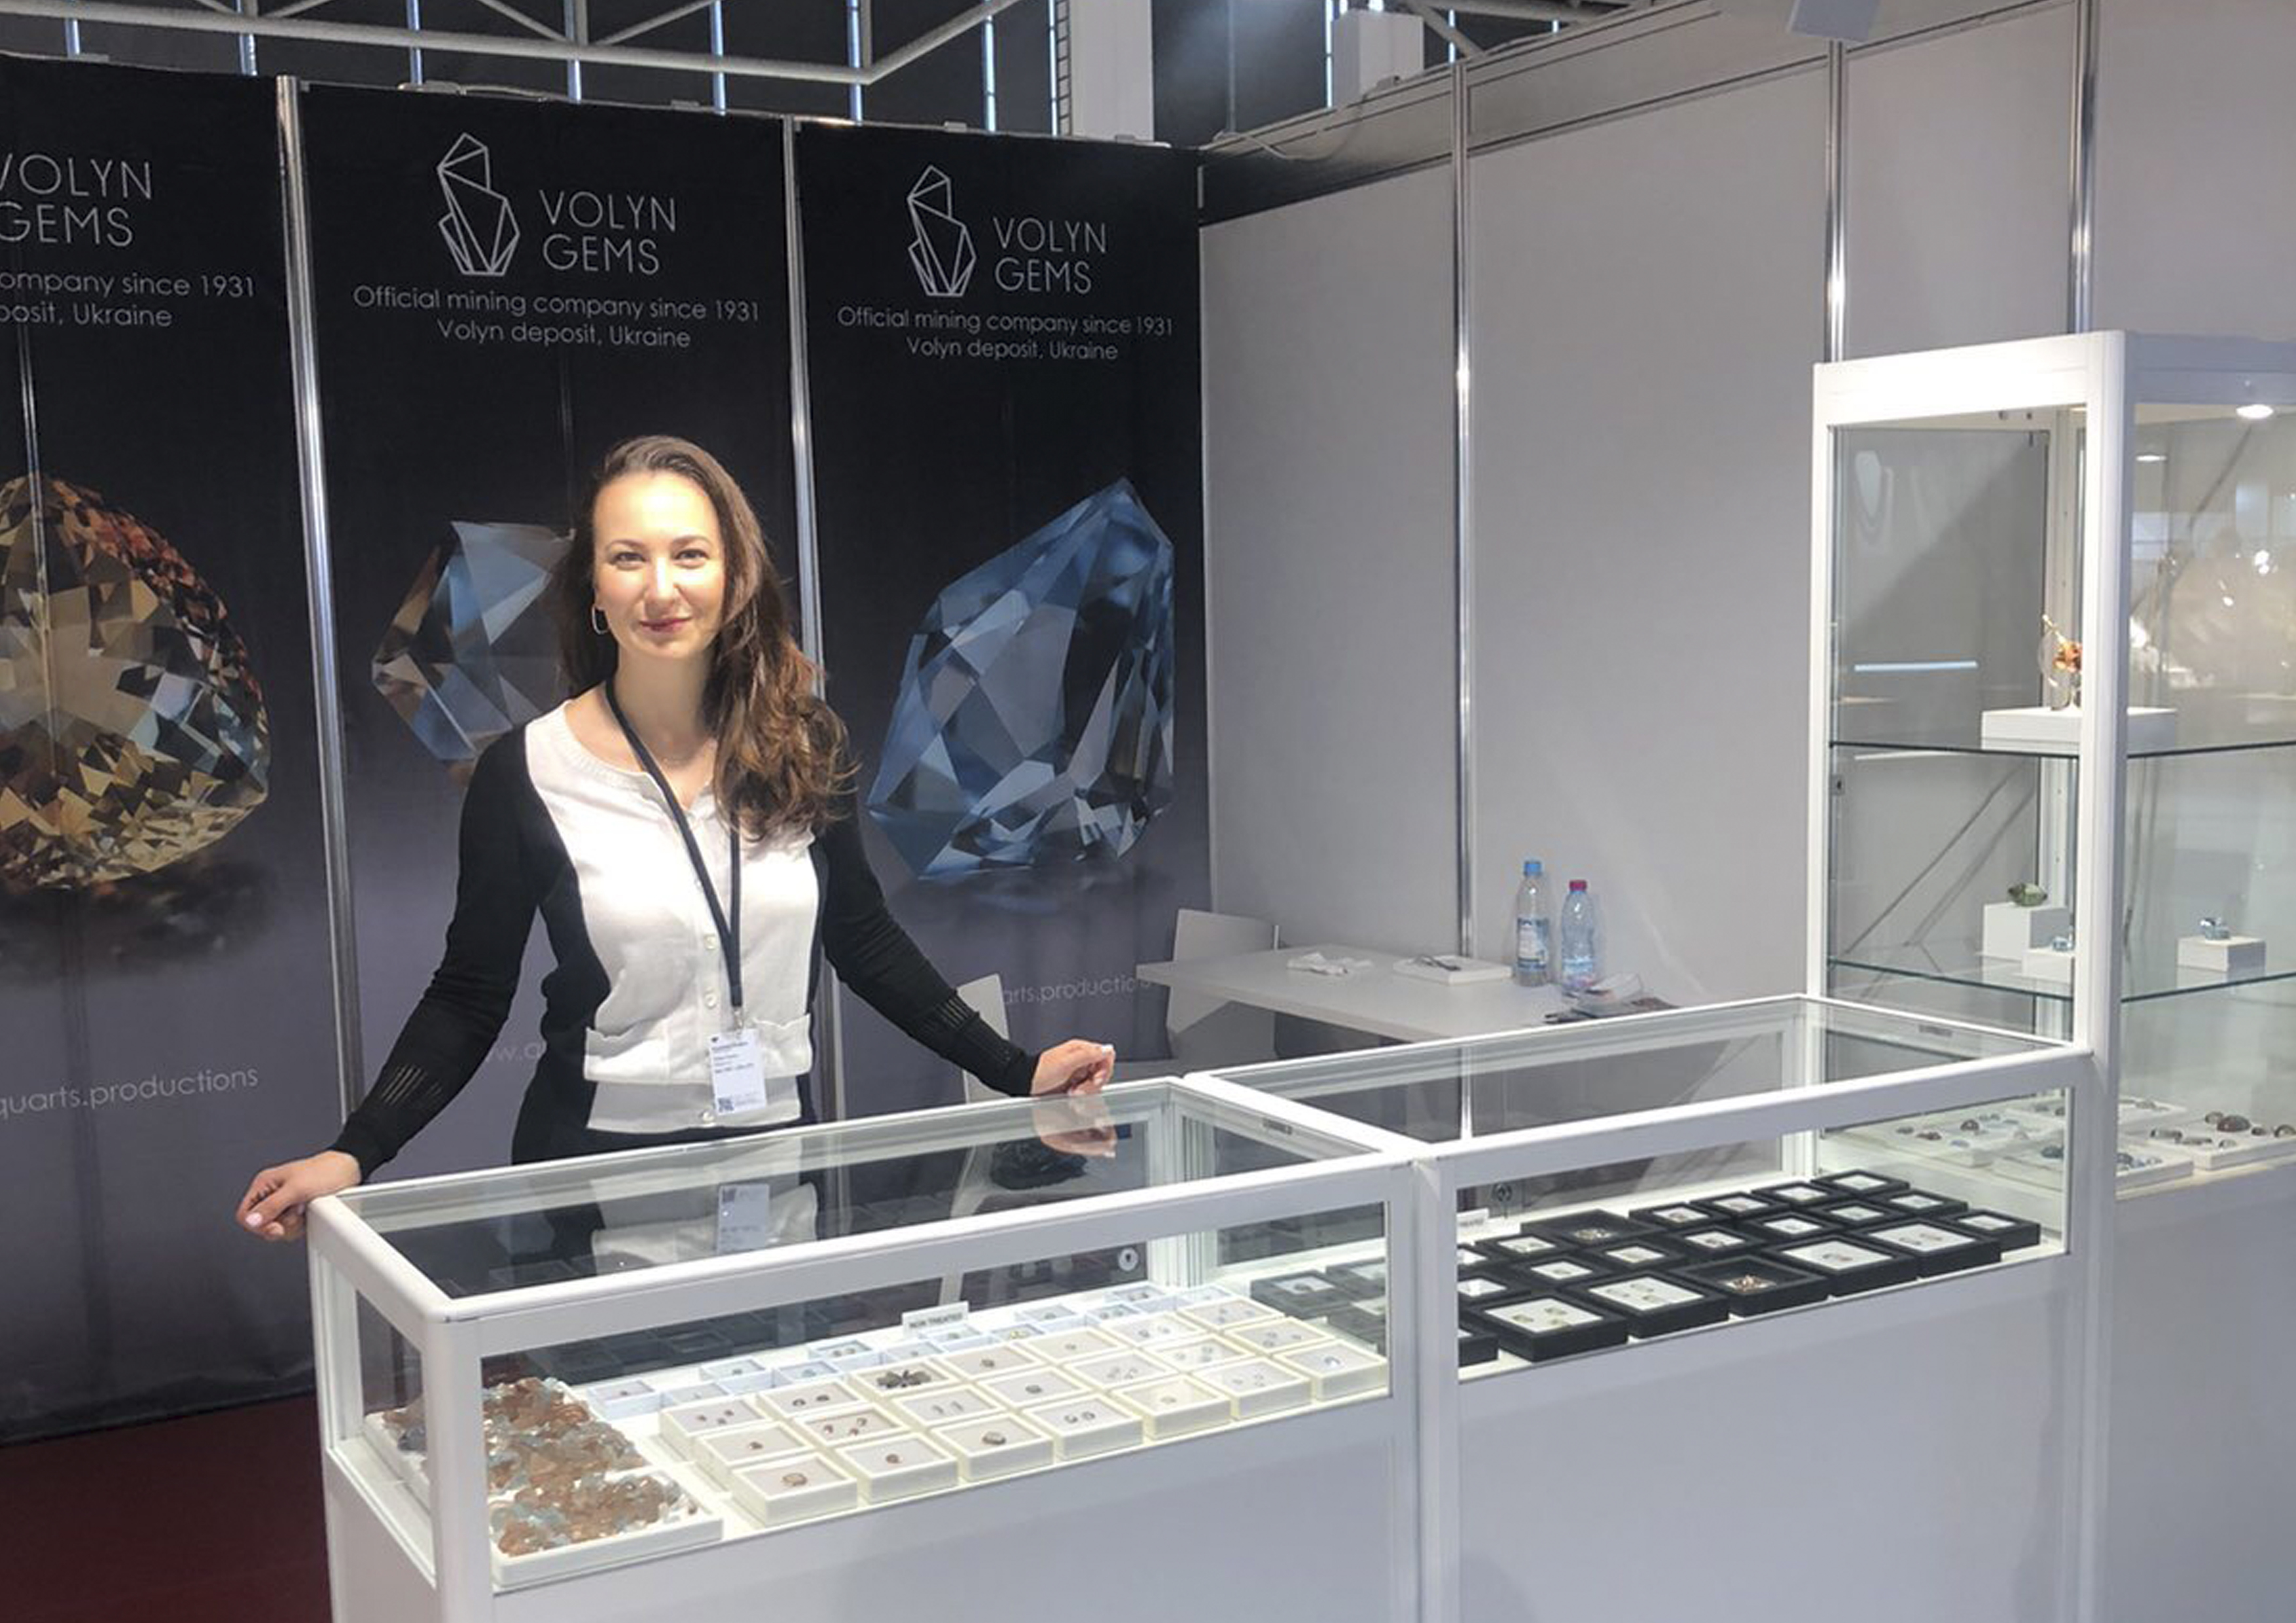 THERE ARE SOME RESULTS OF THE PARTICIPATION IN THE Munich Show - Mineralientage München